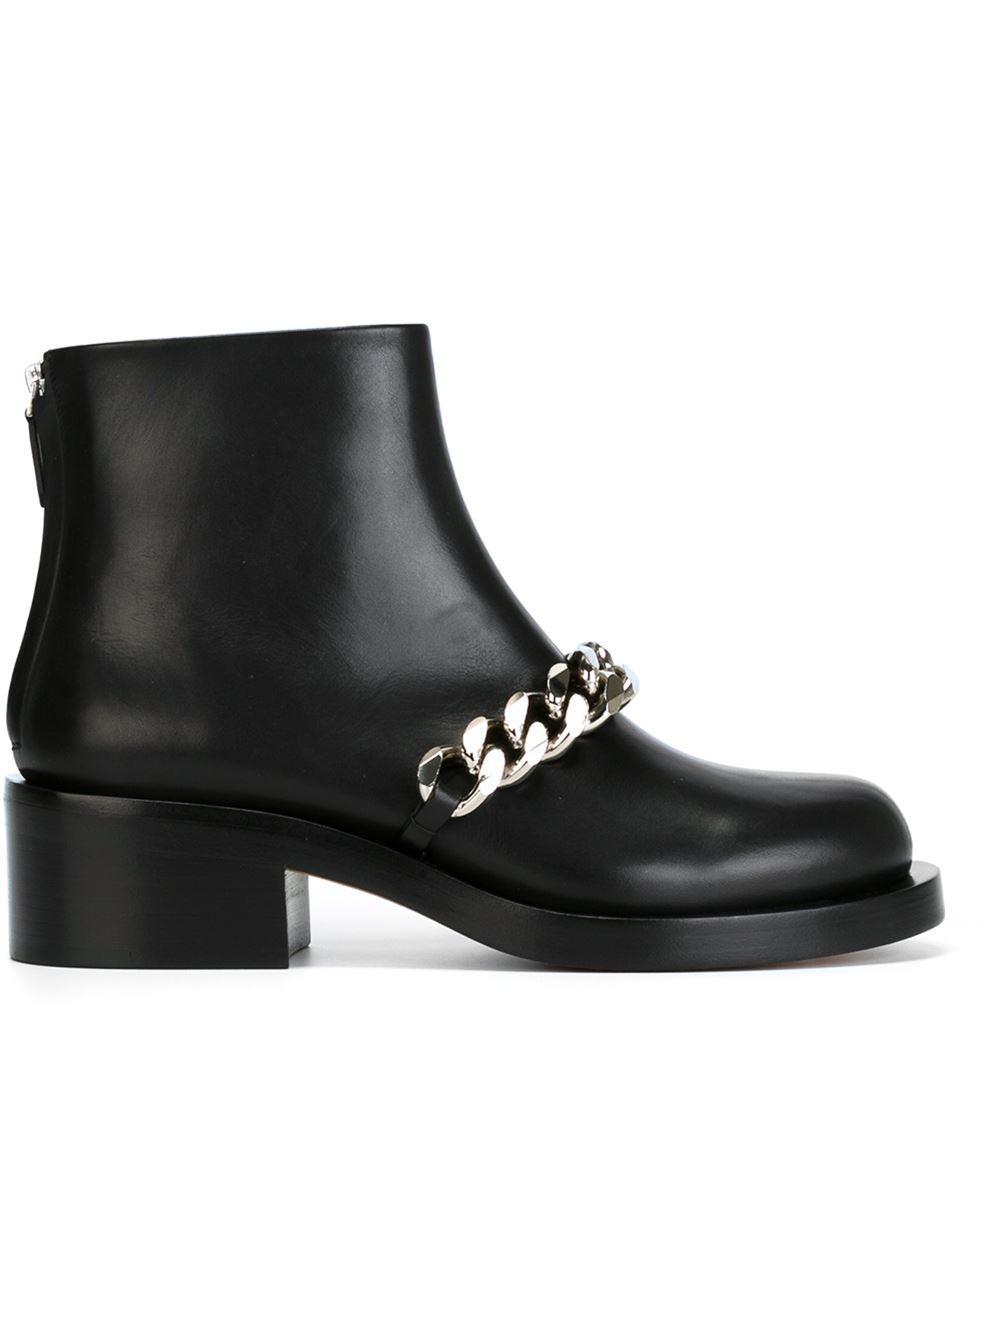 Givenchy Chain Strap Ankle Boot in Black - Save 66% - Lyst